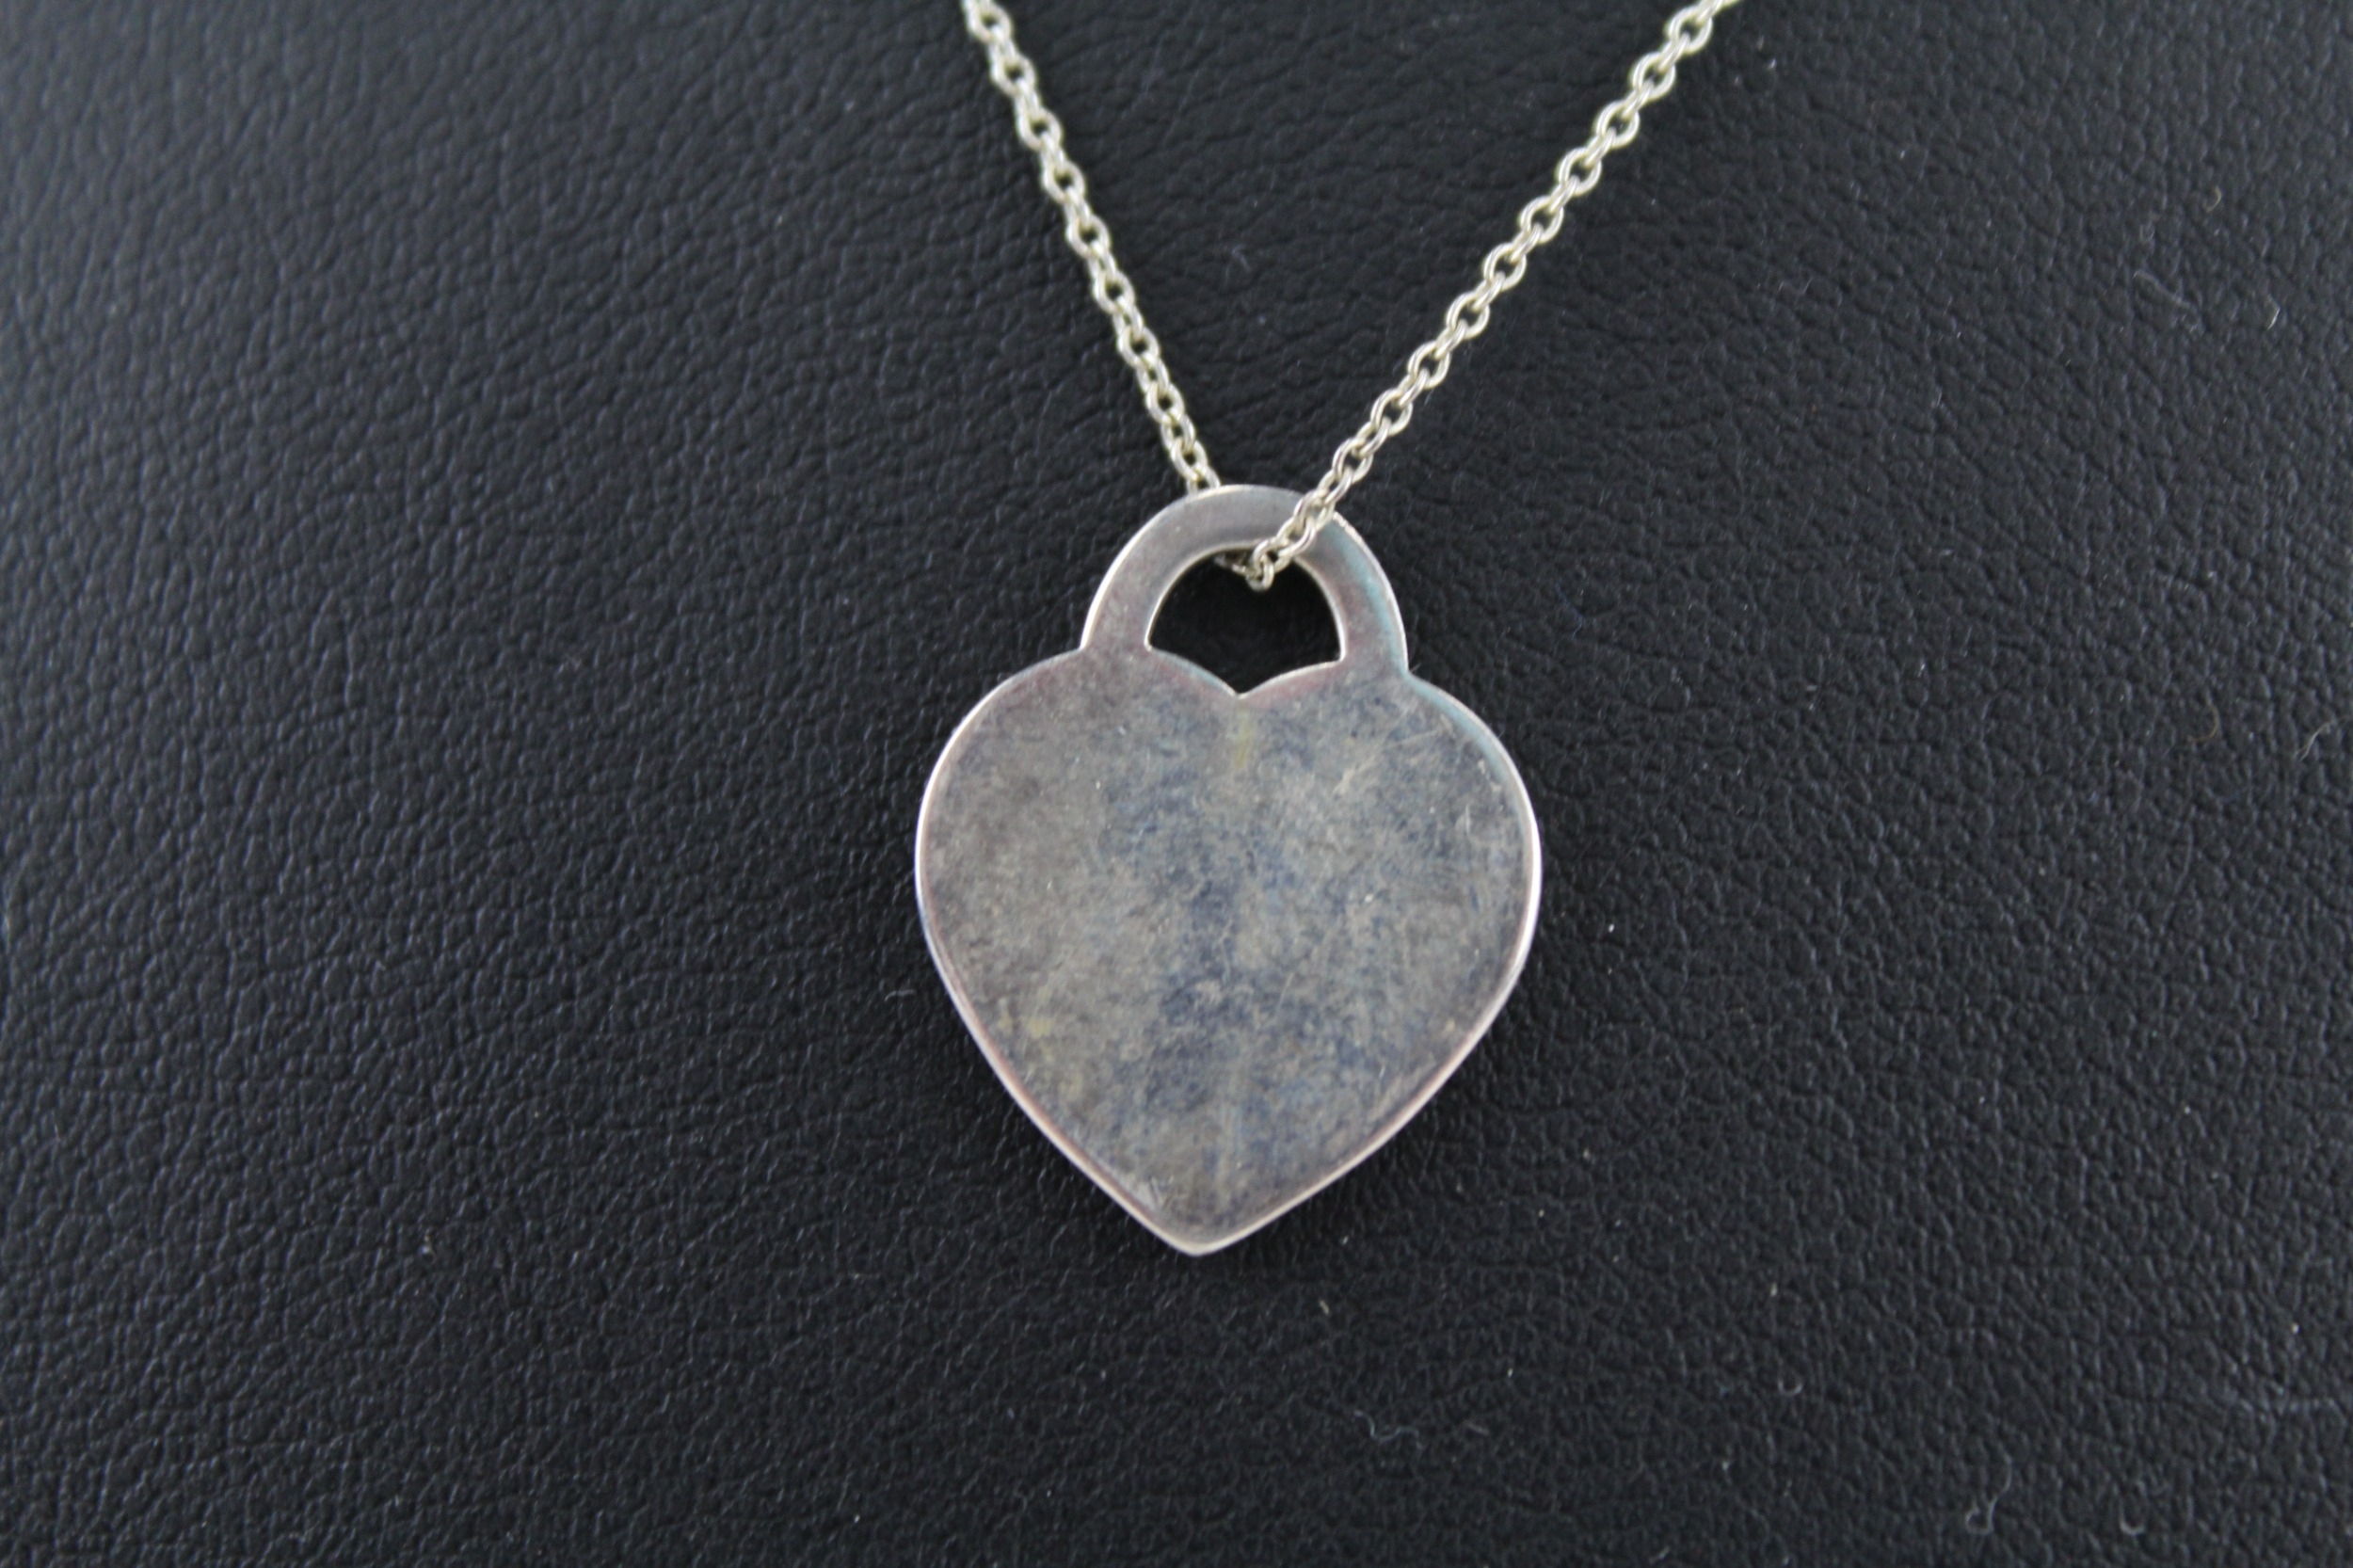 A silver heart pendant necklace by Tiffany and Co (4g) - Image 5 of 5